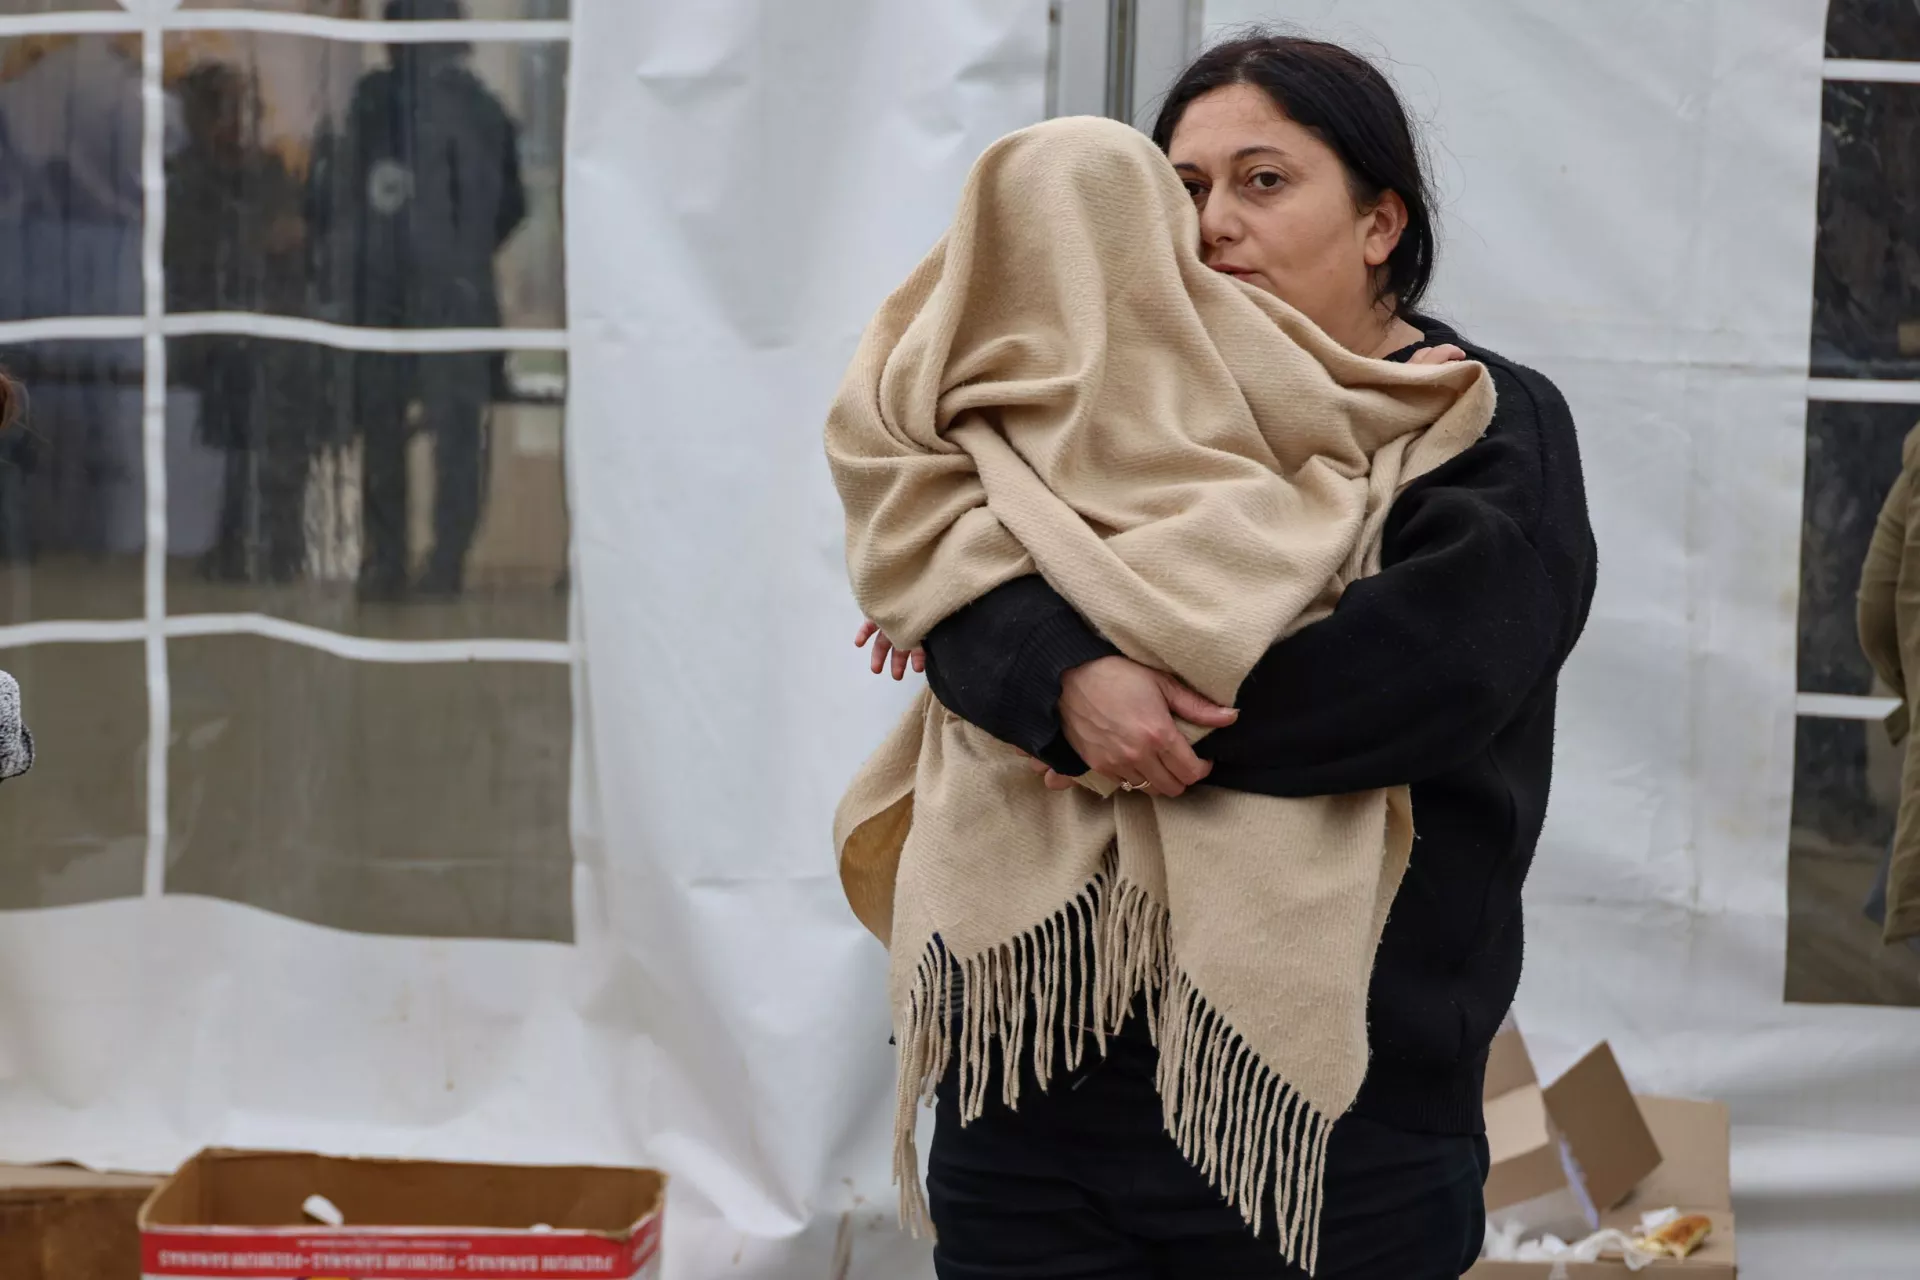 A refugee mother holding her child covered in a blanket in her arms